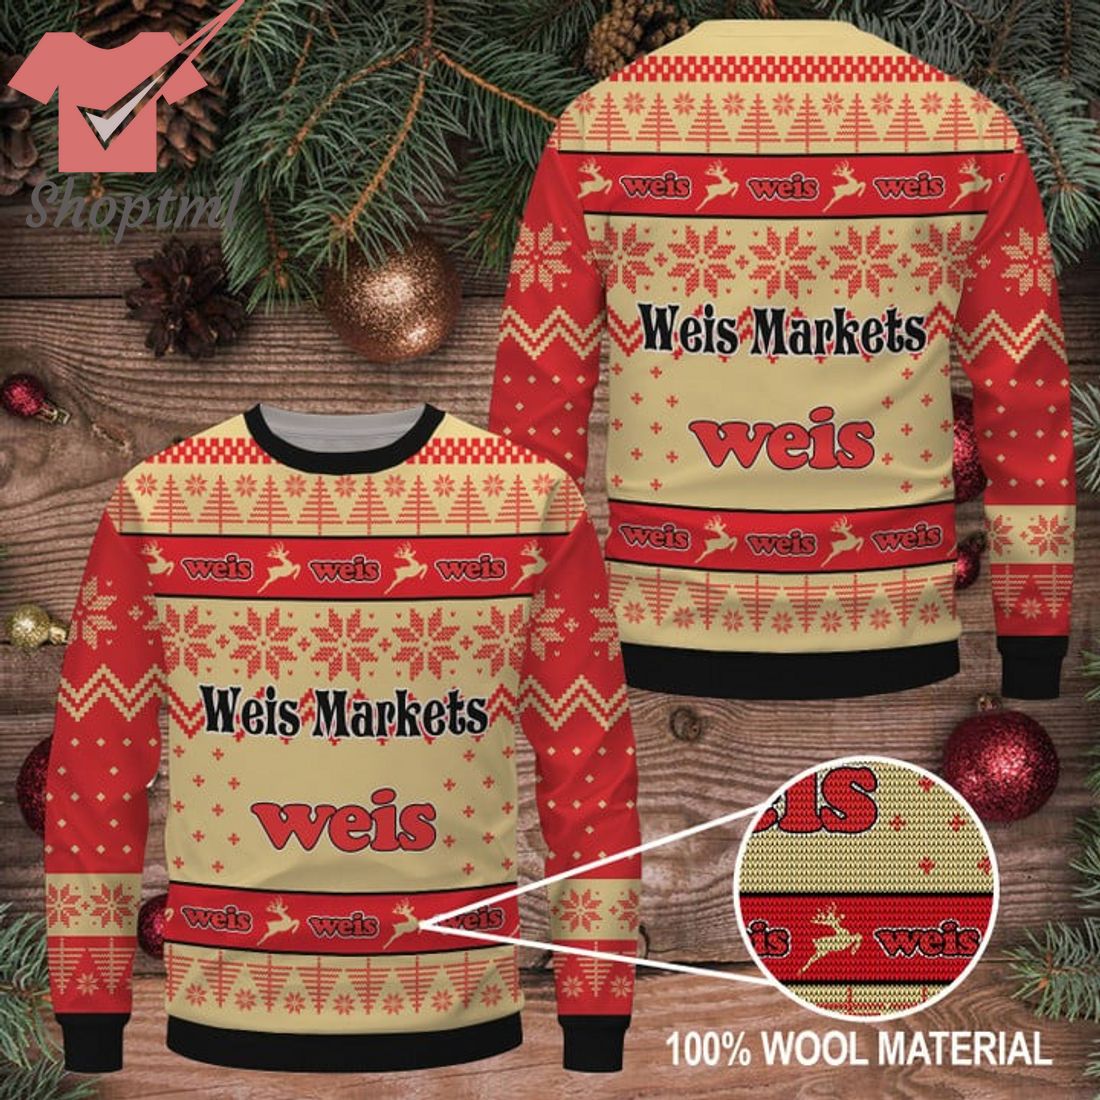 Weis markets logo ugly christmas sweater